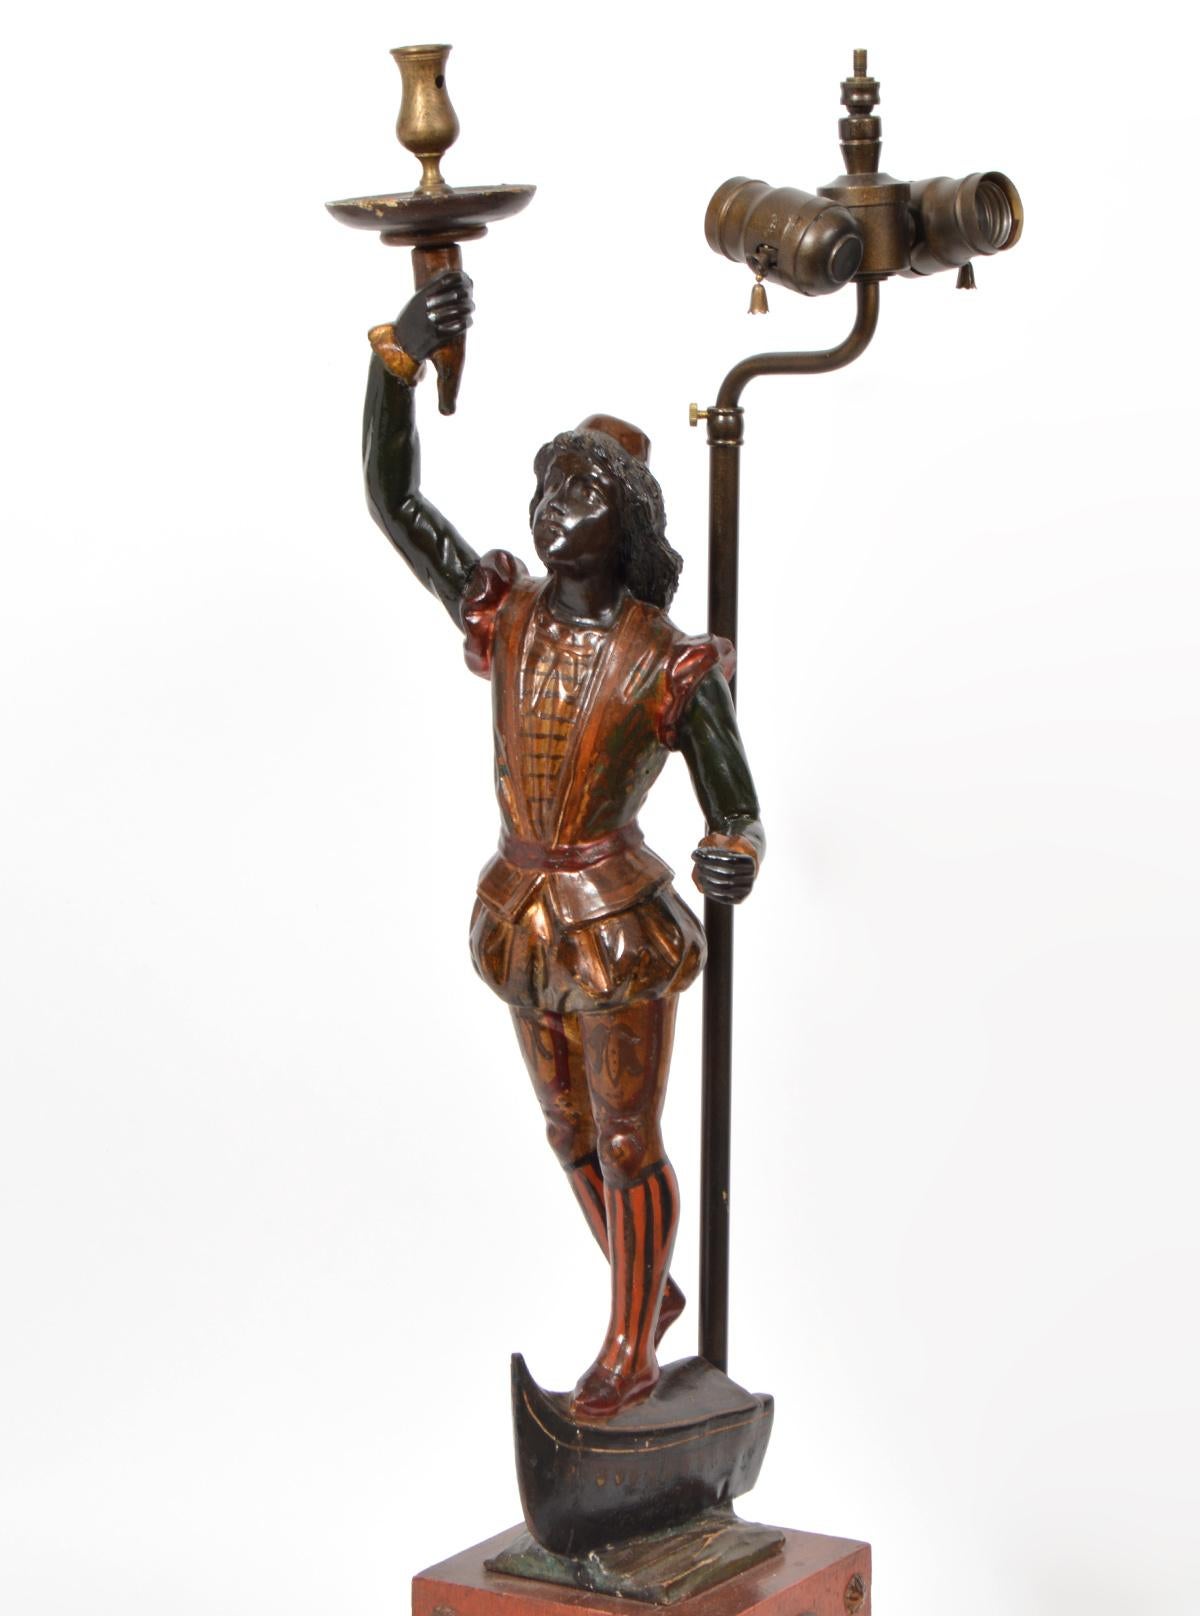 This Italian Venetian style table lamp features a young waiter wearing renaissance style costume standing on a partial gondola raising his right arm with a tray and holding a ceremonial pole in his left hand, early 20th century. The figure,